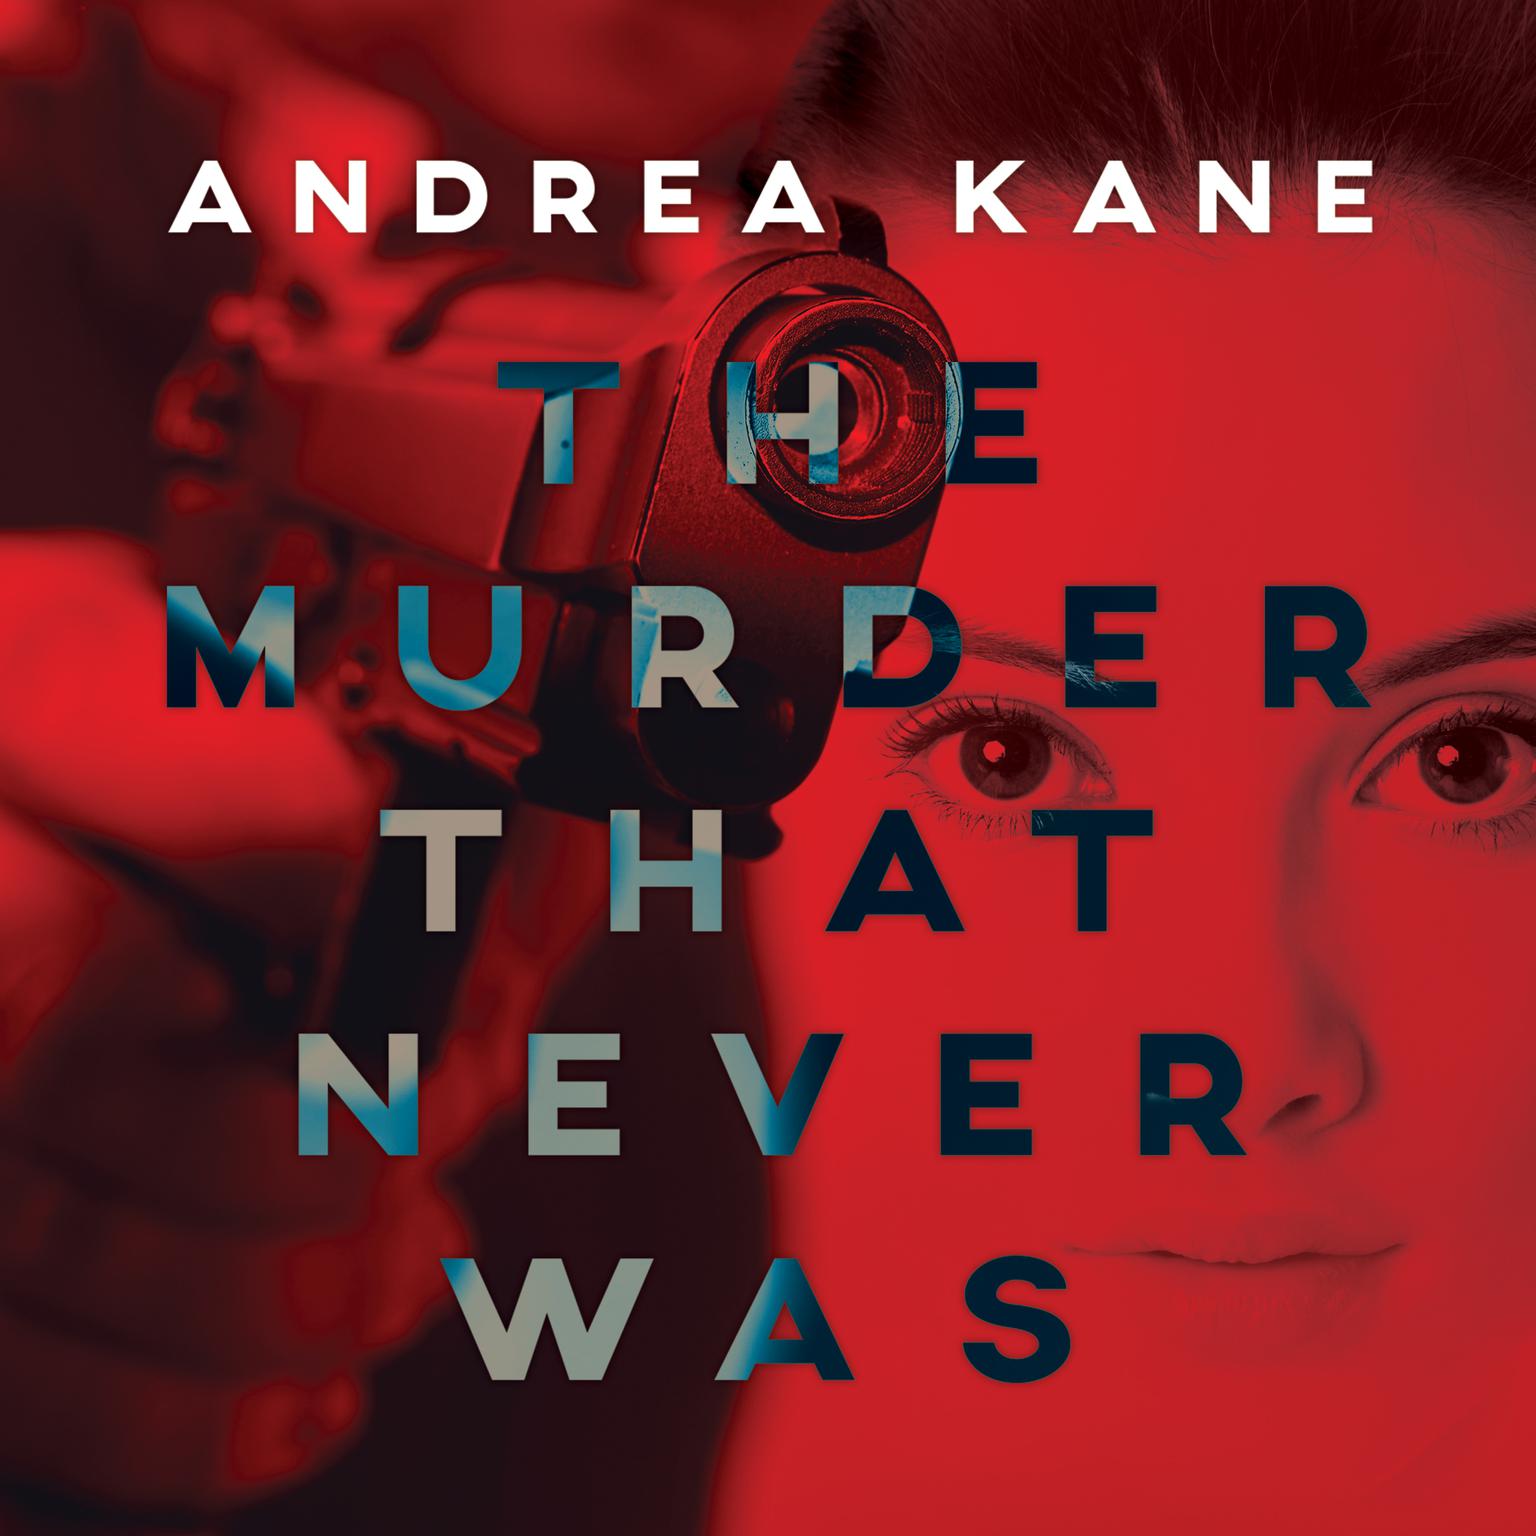 The Murder That Never Was Audiobook, by Andrea Kane